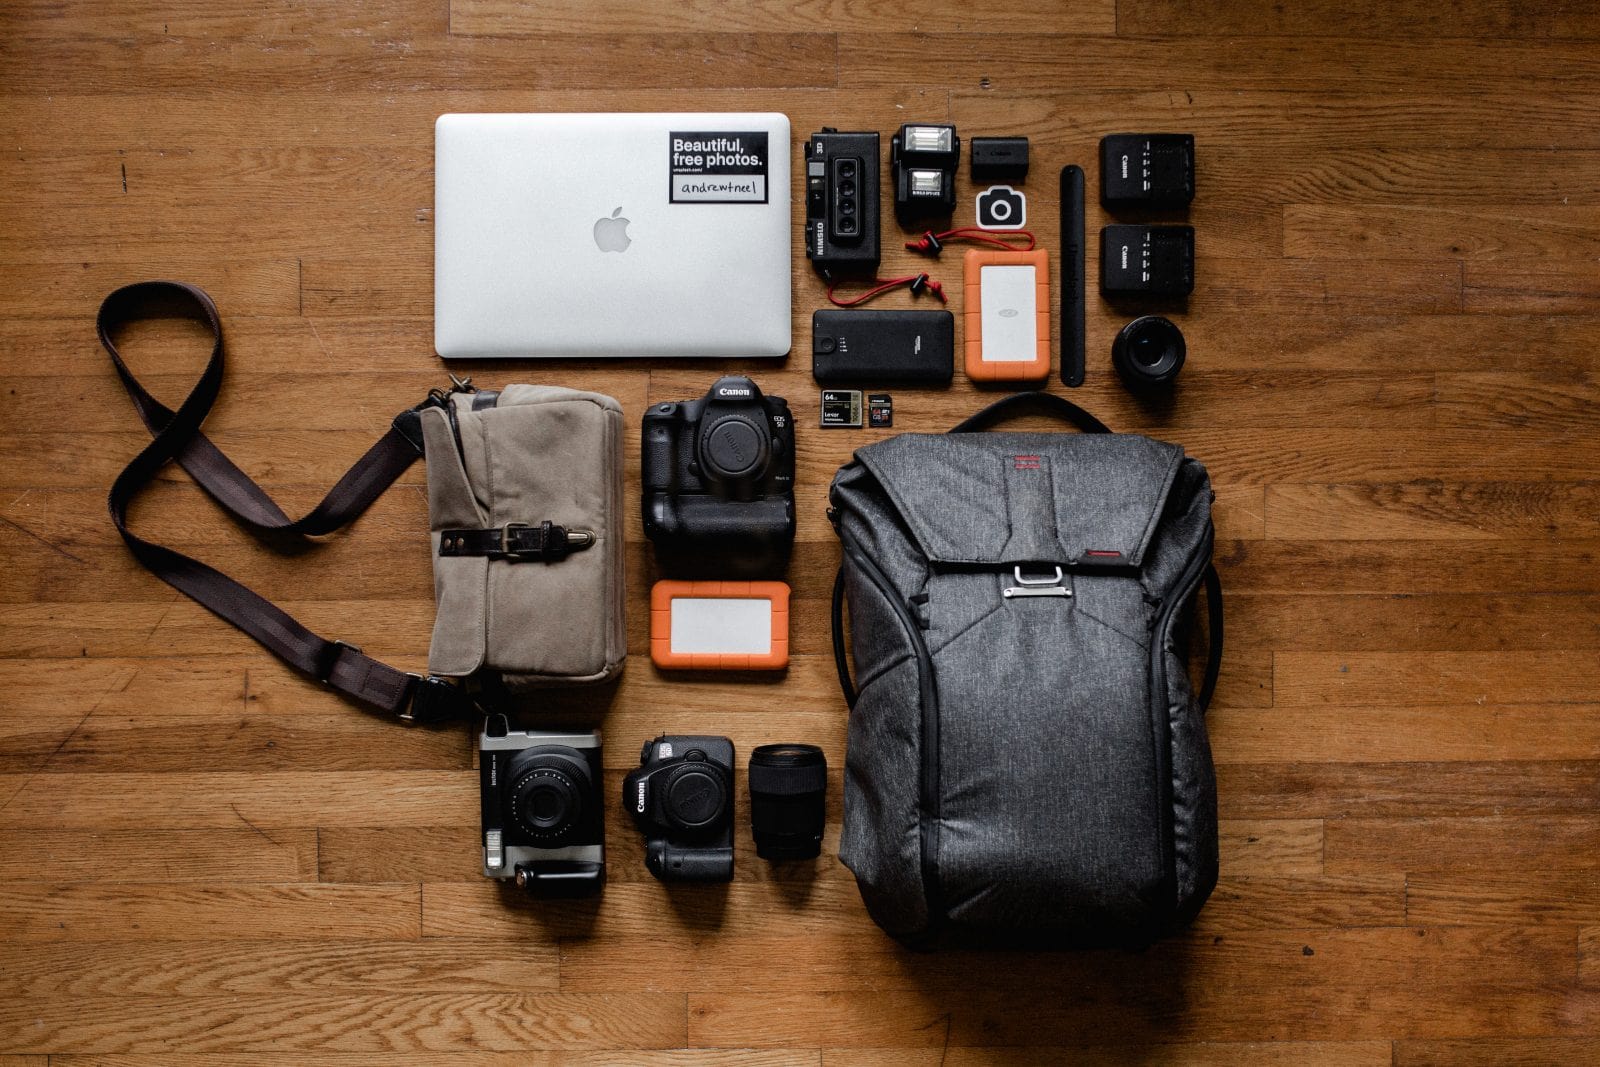 Packing tech gear for travel